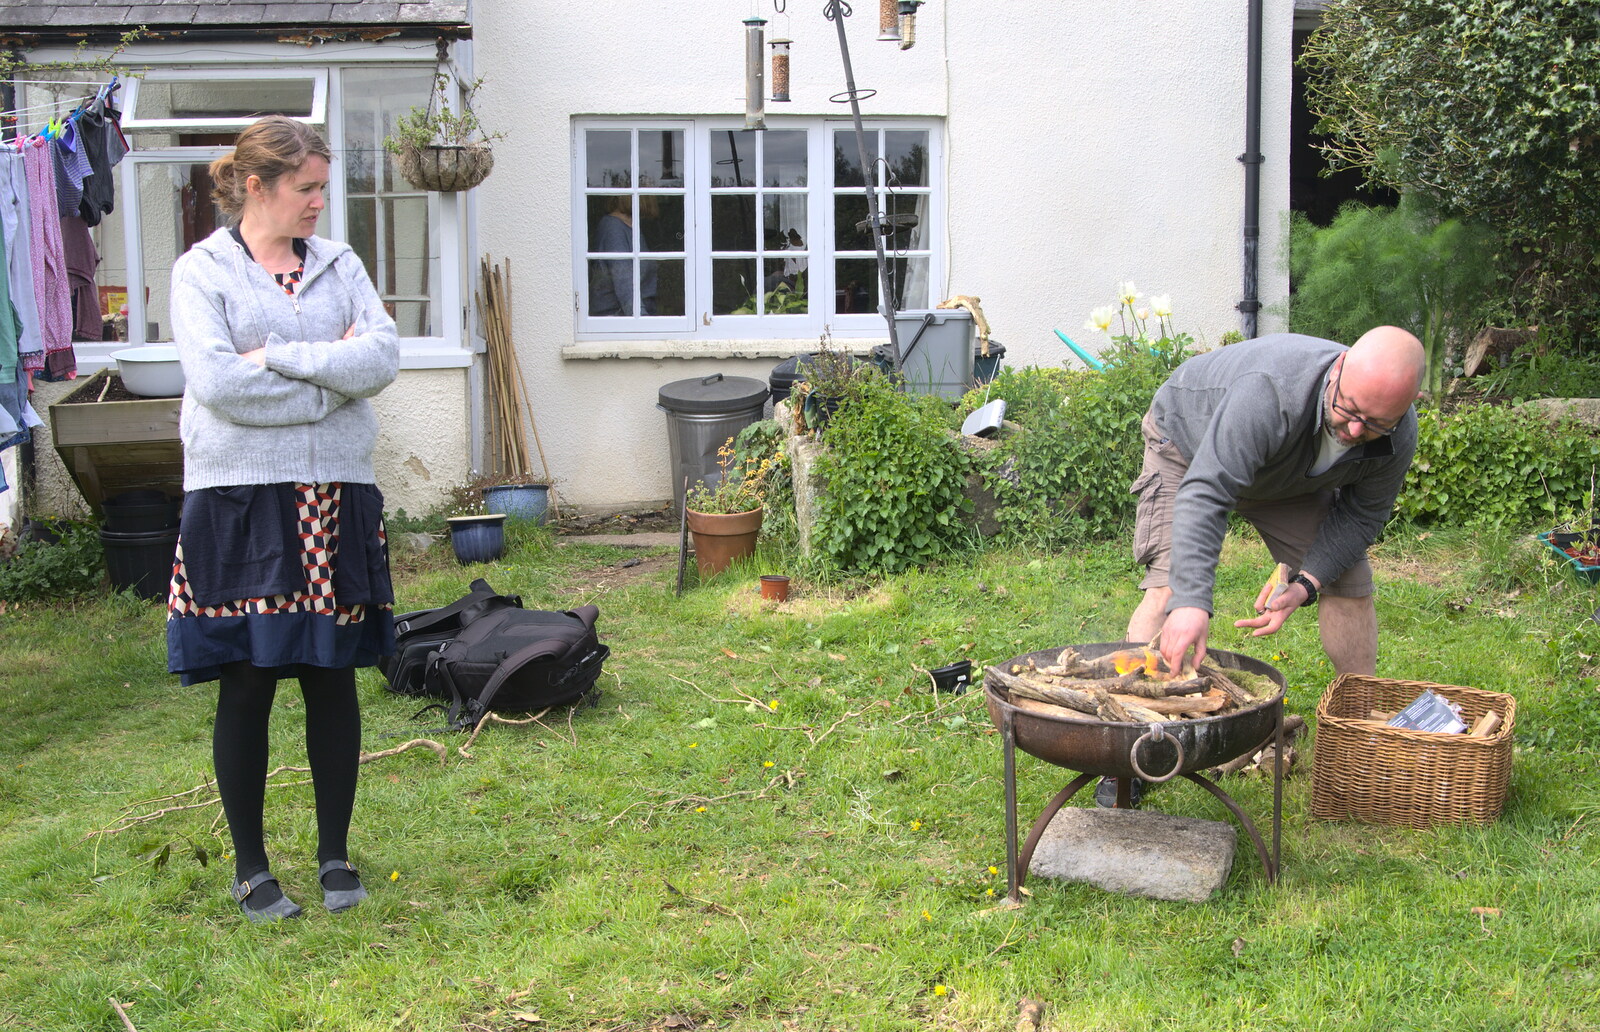 Isobel watches as stuff is set on fire from A Barbeque, Grimspound and Pizza, Dartmoor and Exeter, Devon - 15th April 2017